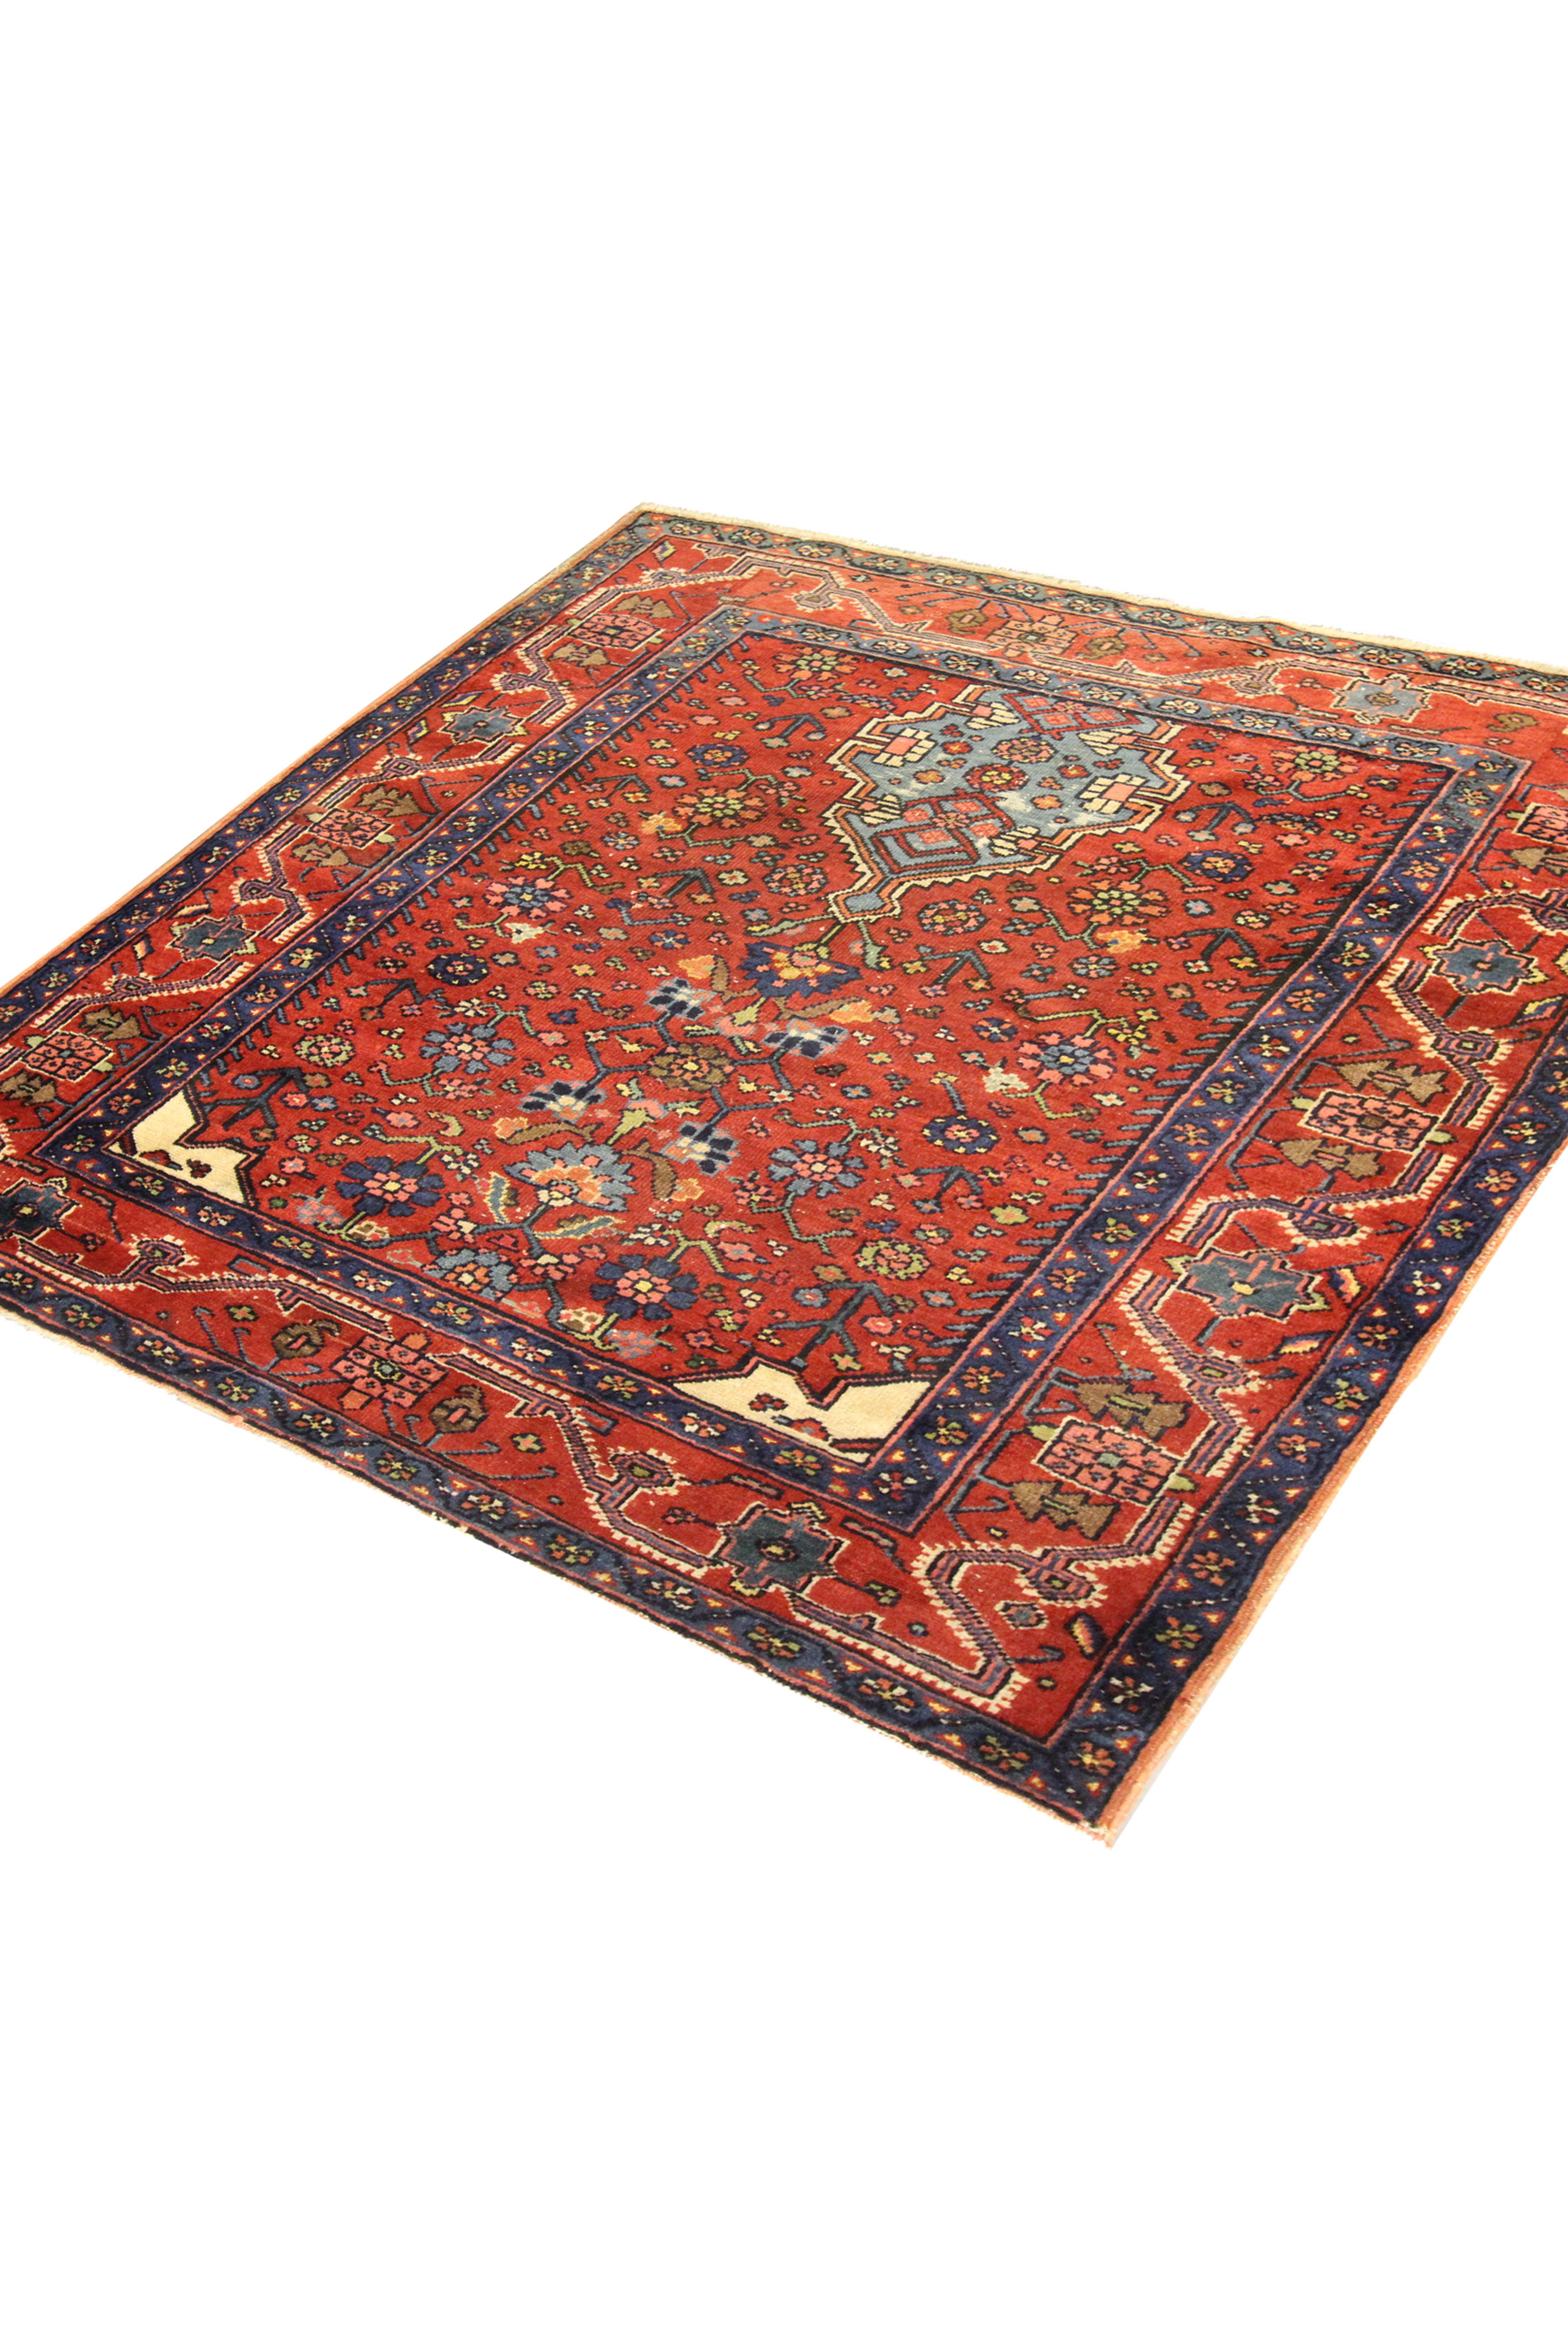 Tribal Traditional Oriental Rug Rust Antique Rug Handwoven Wool Carpet For Sale